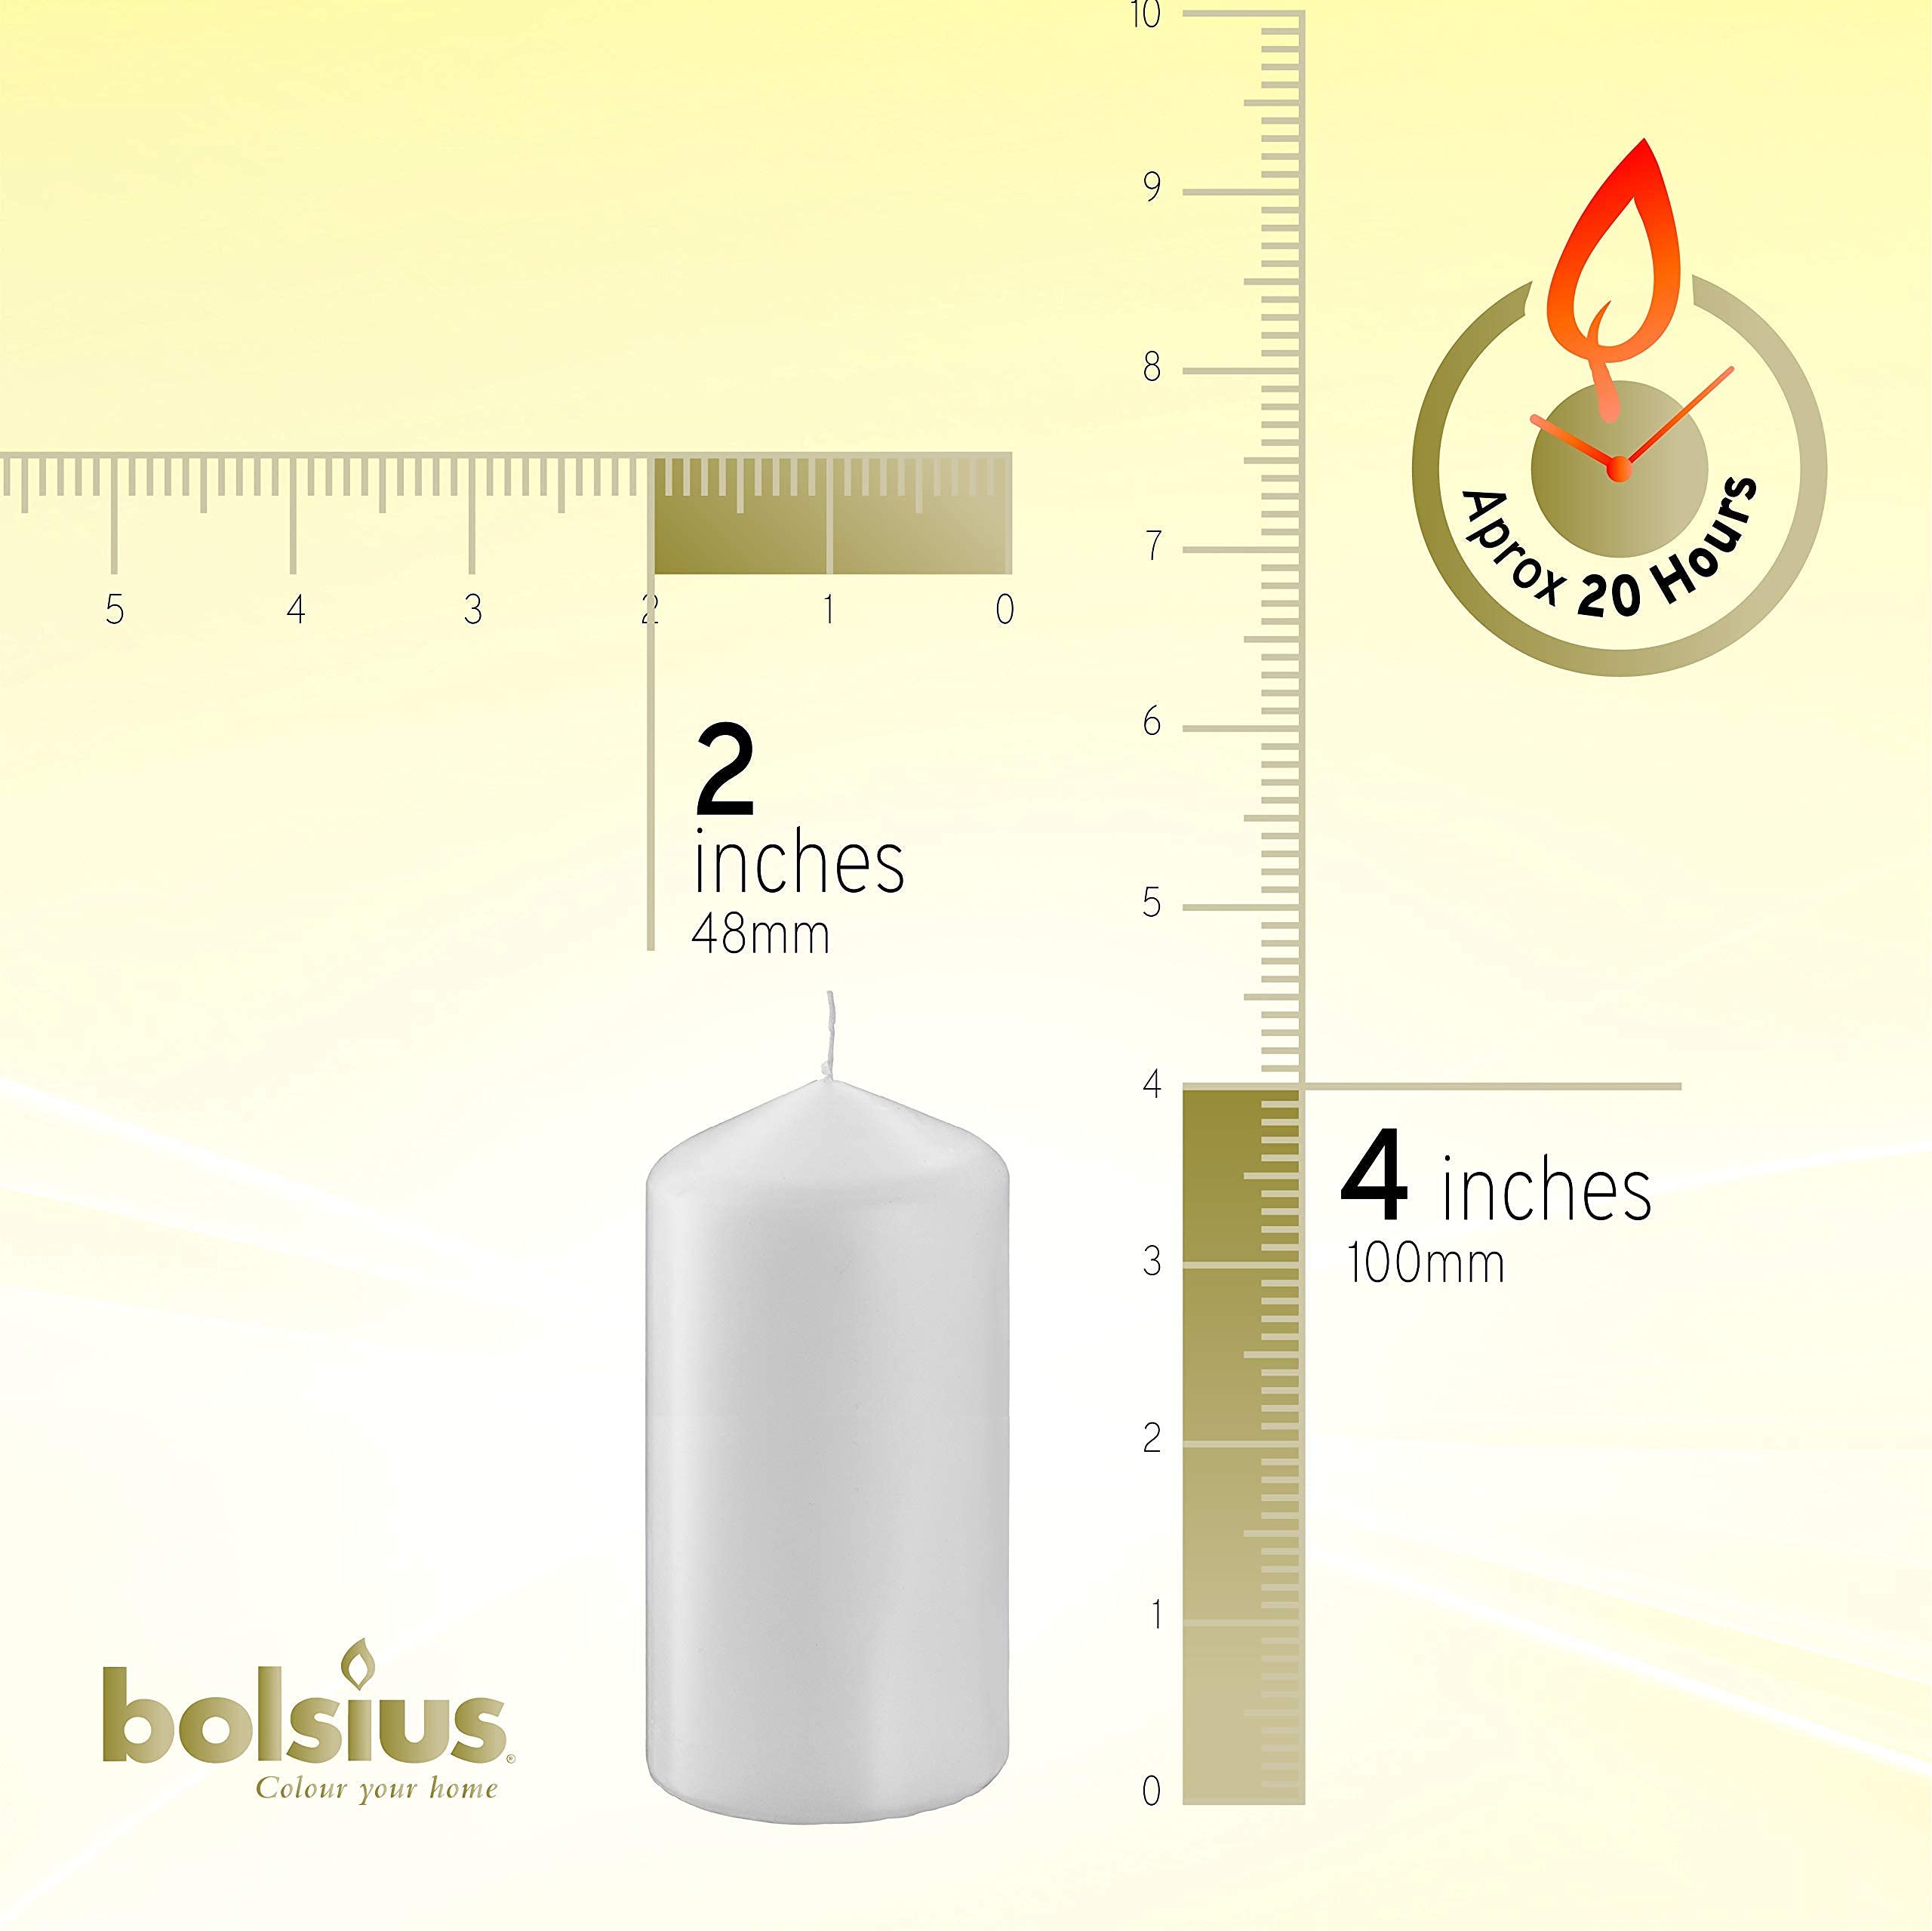 BOLSIUS 2x4 Inch Red Pillar Candles - 4 Pack Candle Set - 20 Hours Burn Time - Premium European Quality - Dripless and Smokeless Candle - Perfect for Wedding Candles, Party, and Special Occasions  - Like New